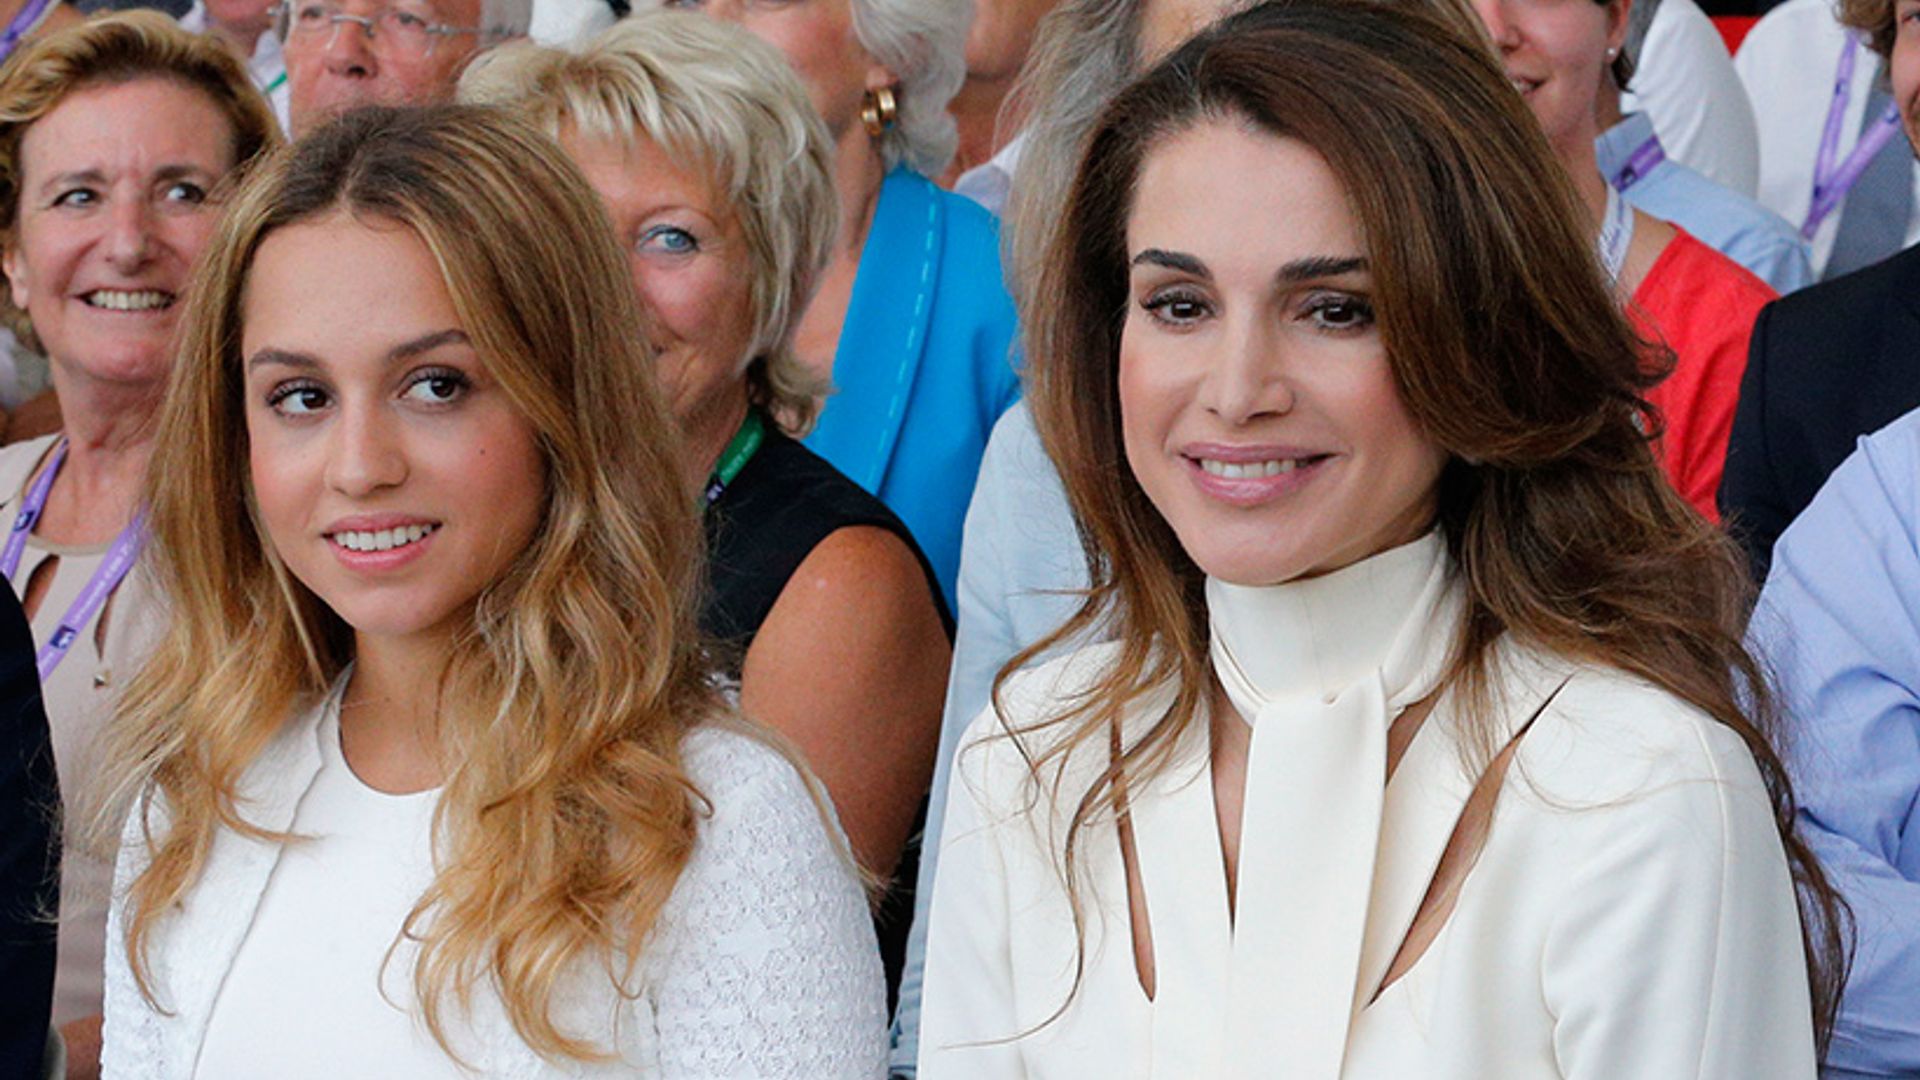 Princess Iman of Jordan: everything you need to know about Queen Rania's lookalike daughter